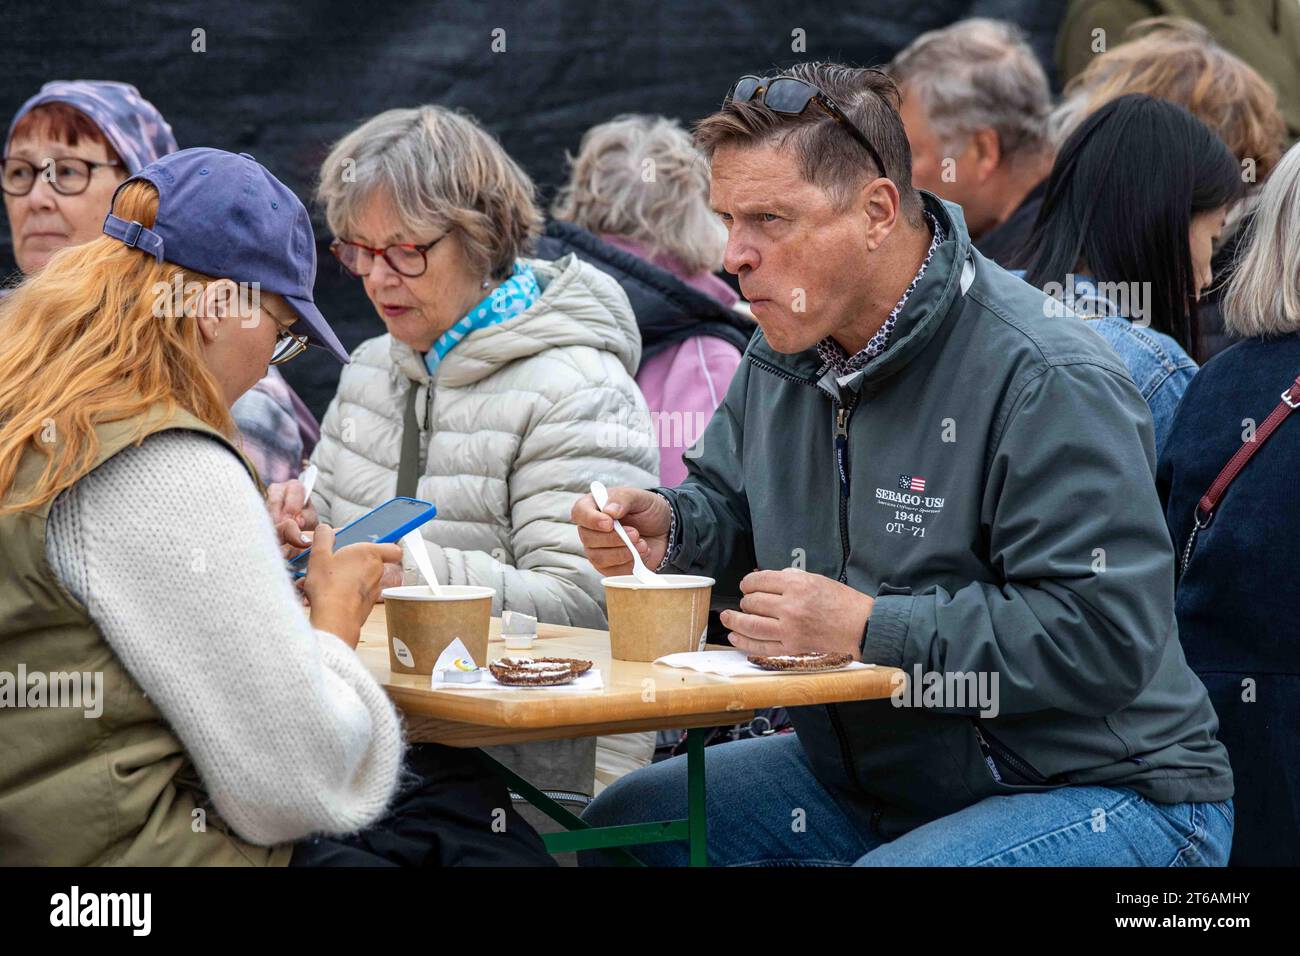 People eating fish soup at Baltic Herring Fair or Stadin silakkamarkkinat on Market Square in Helsinki, Finland Stock Photo